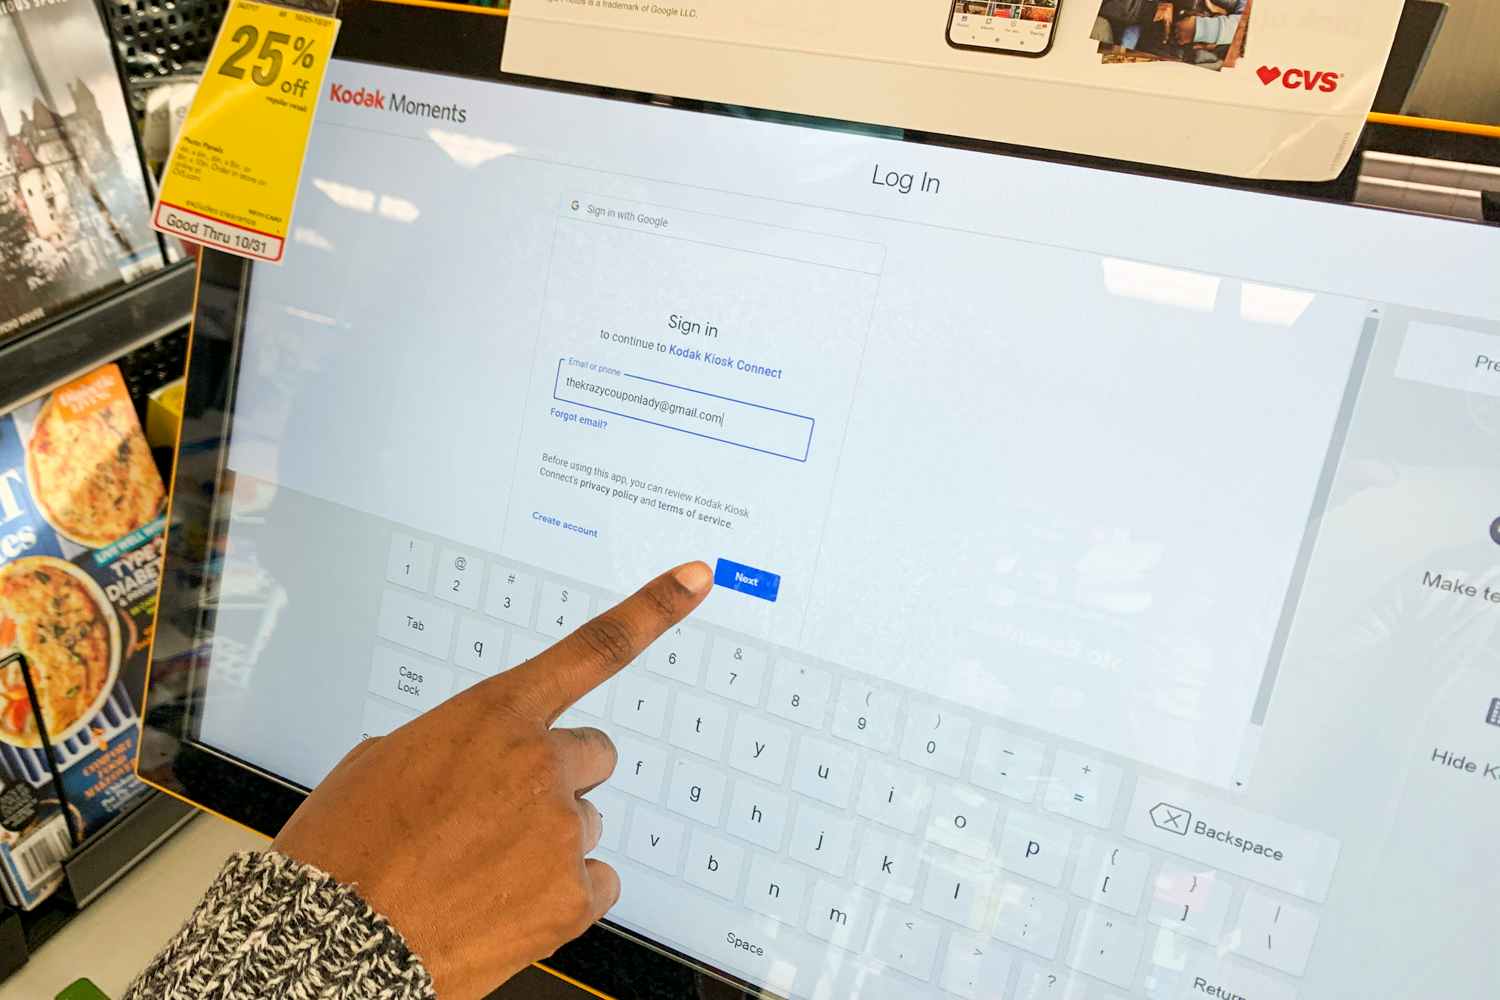 woman putting in her email to sign in to google photos at cvs